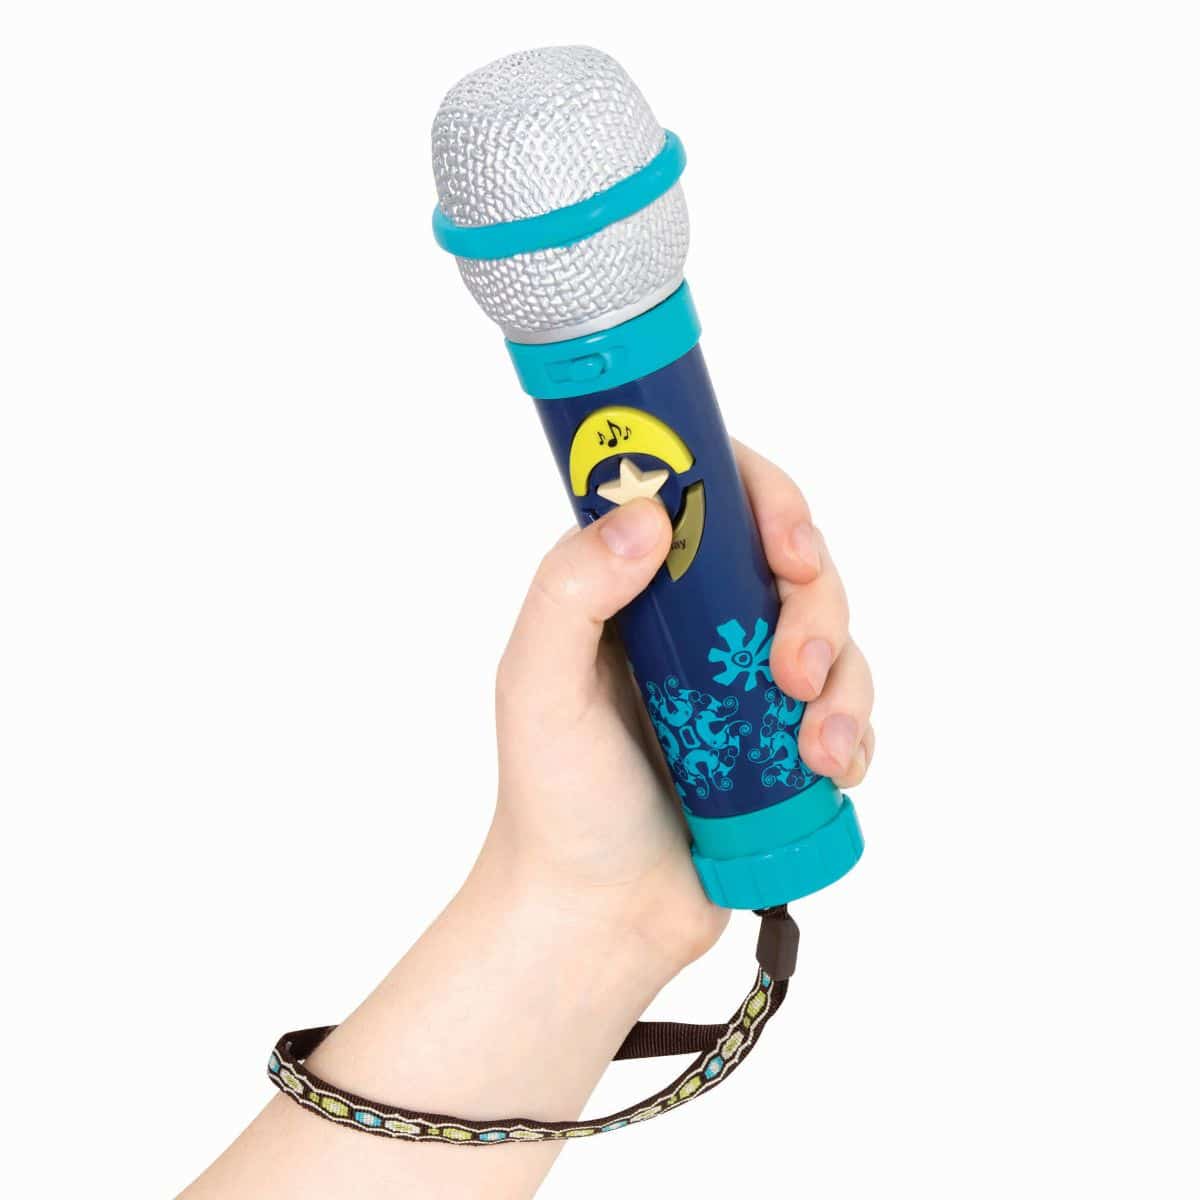 Toy karaoke microphone with strap